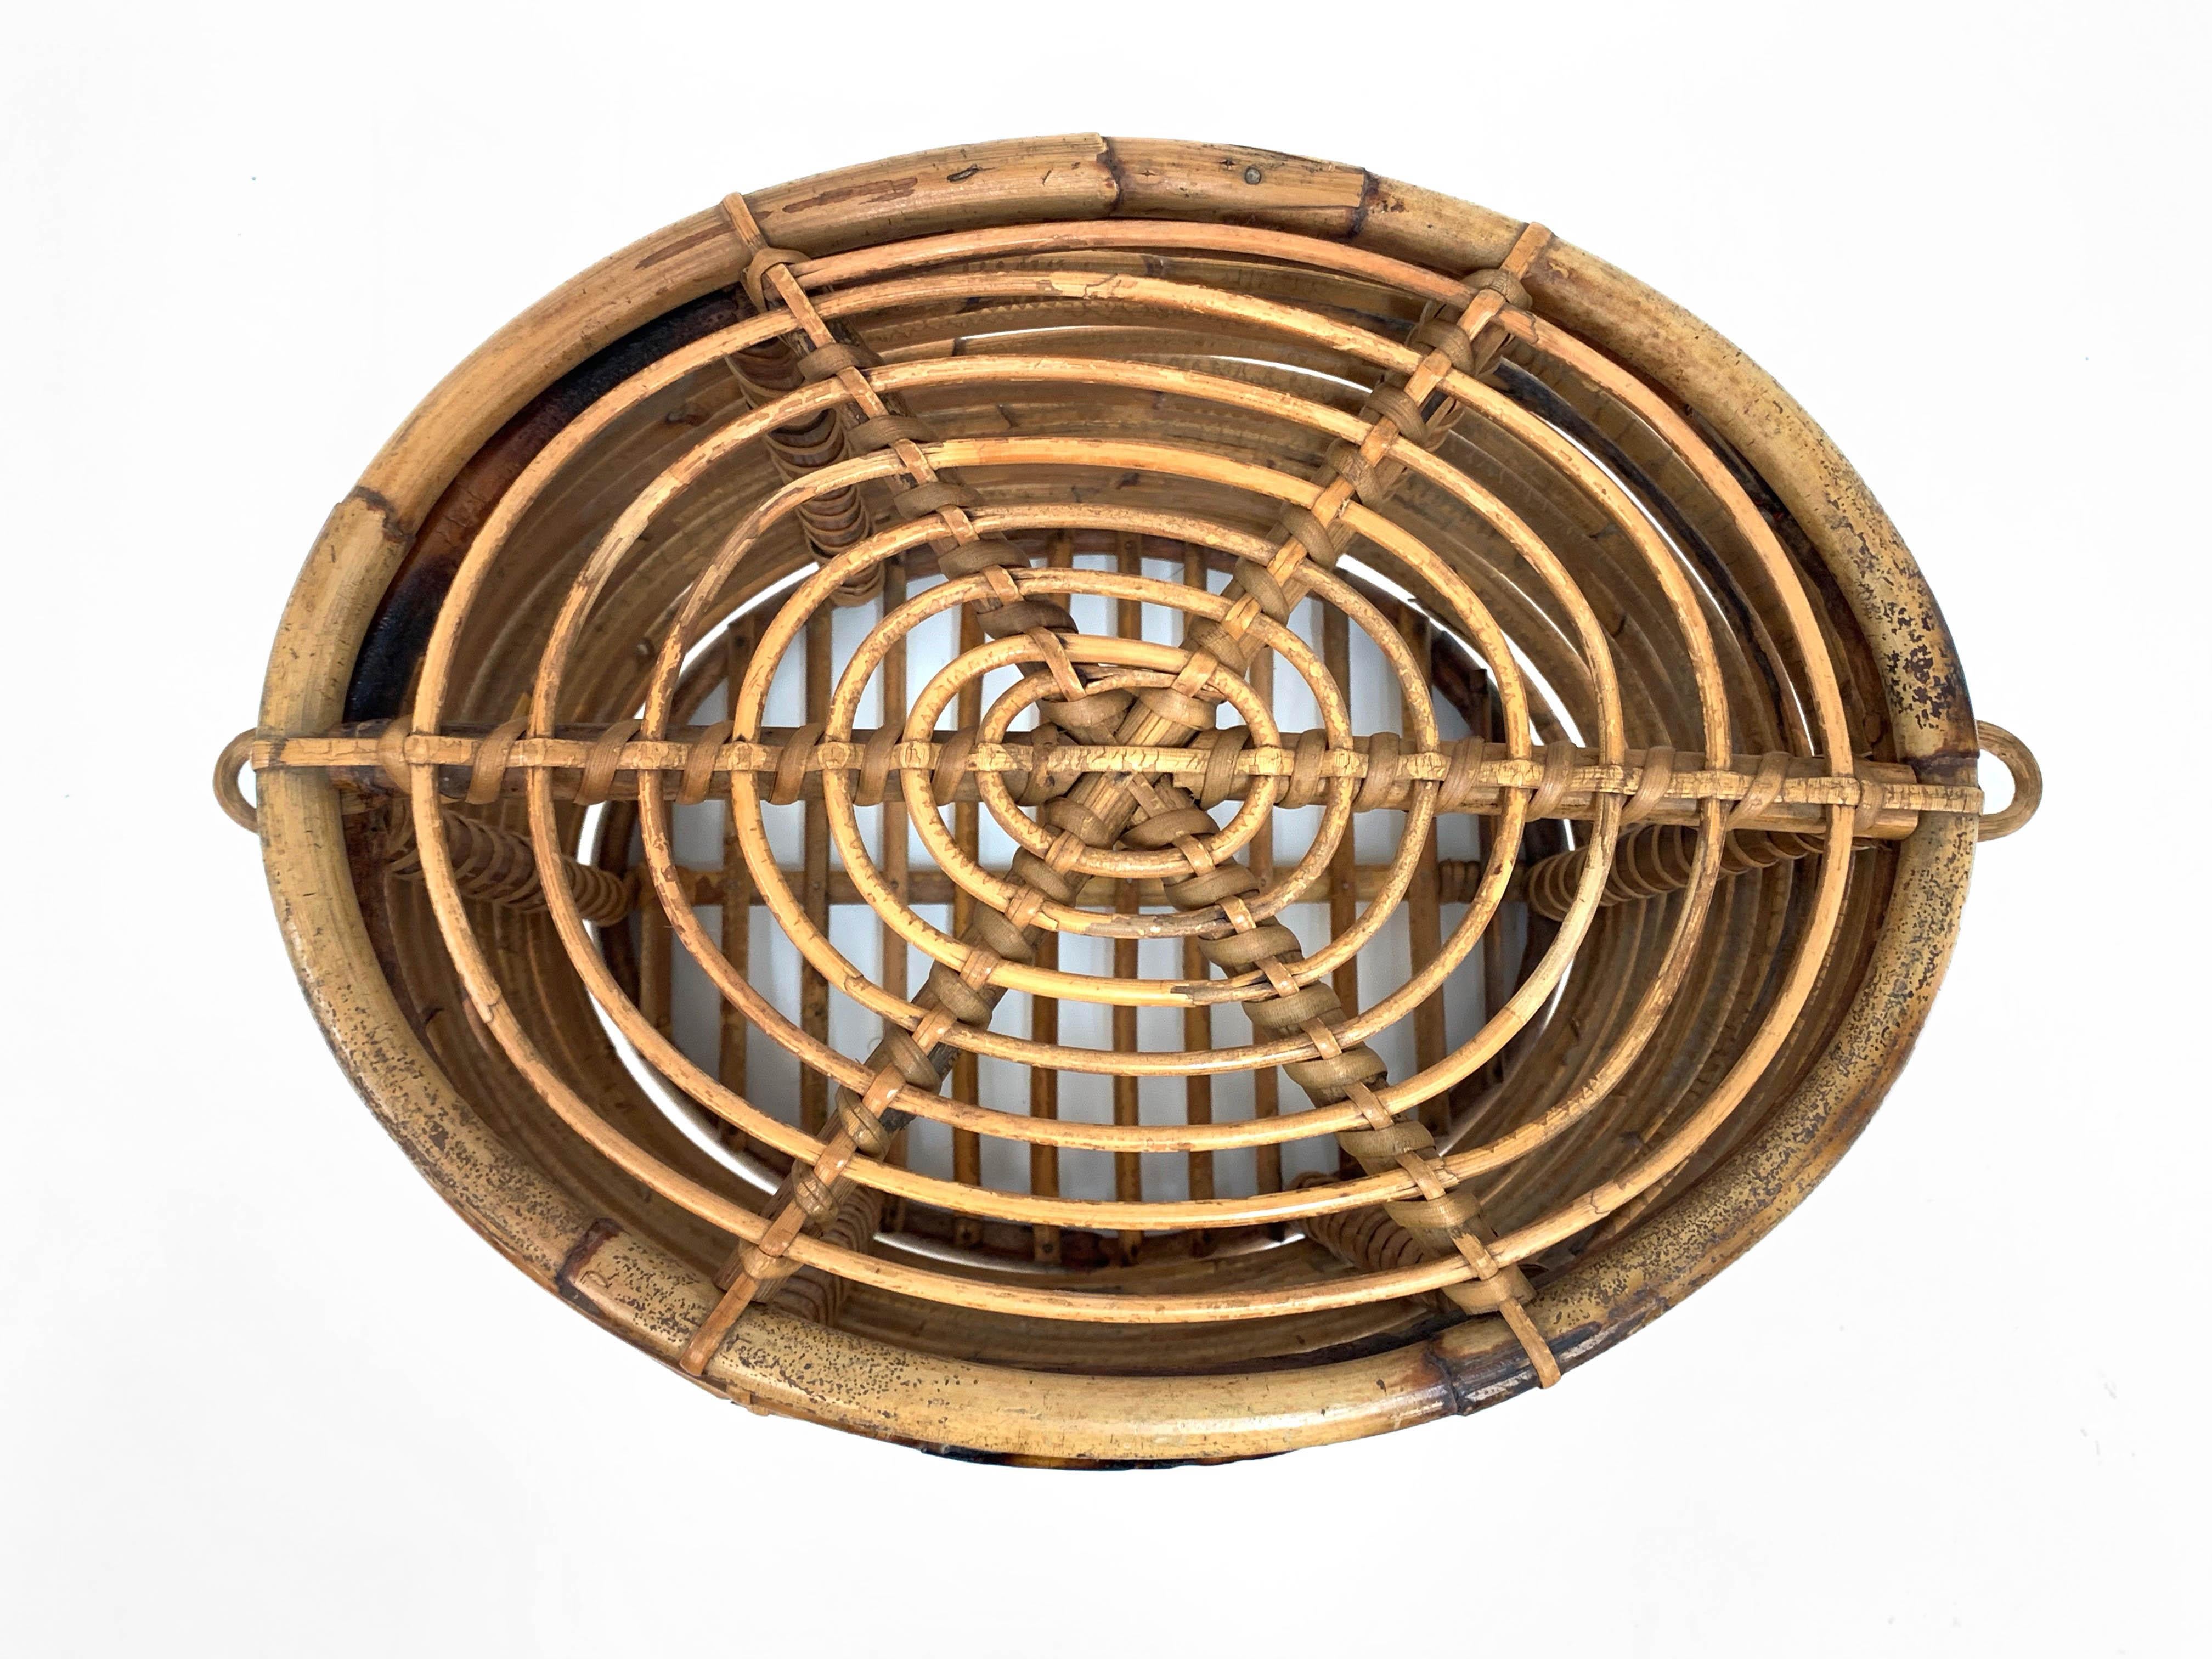 Midcentury French Riviera Bamboo and Rattan Oval Italian Basket, 1950s For Sale 1